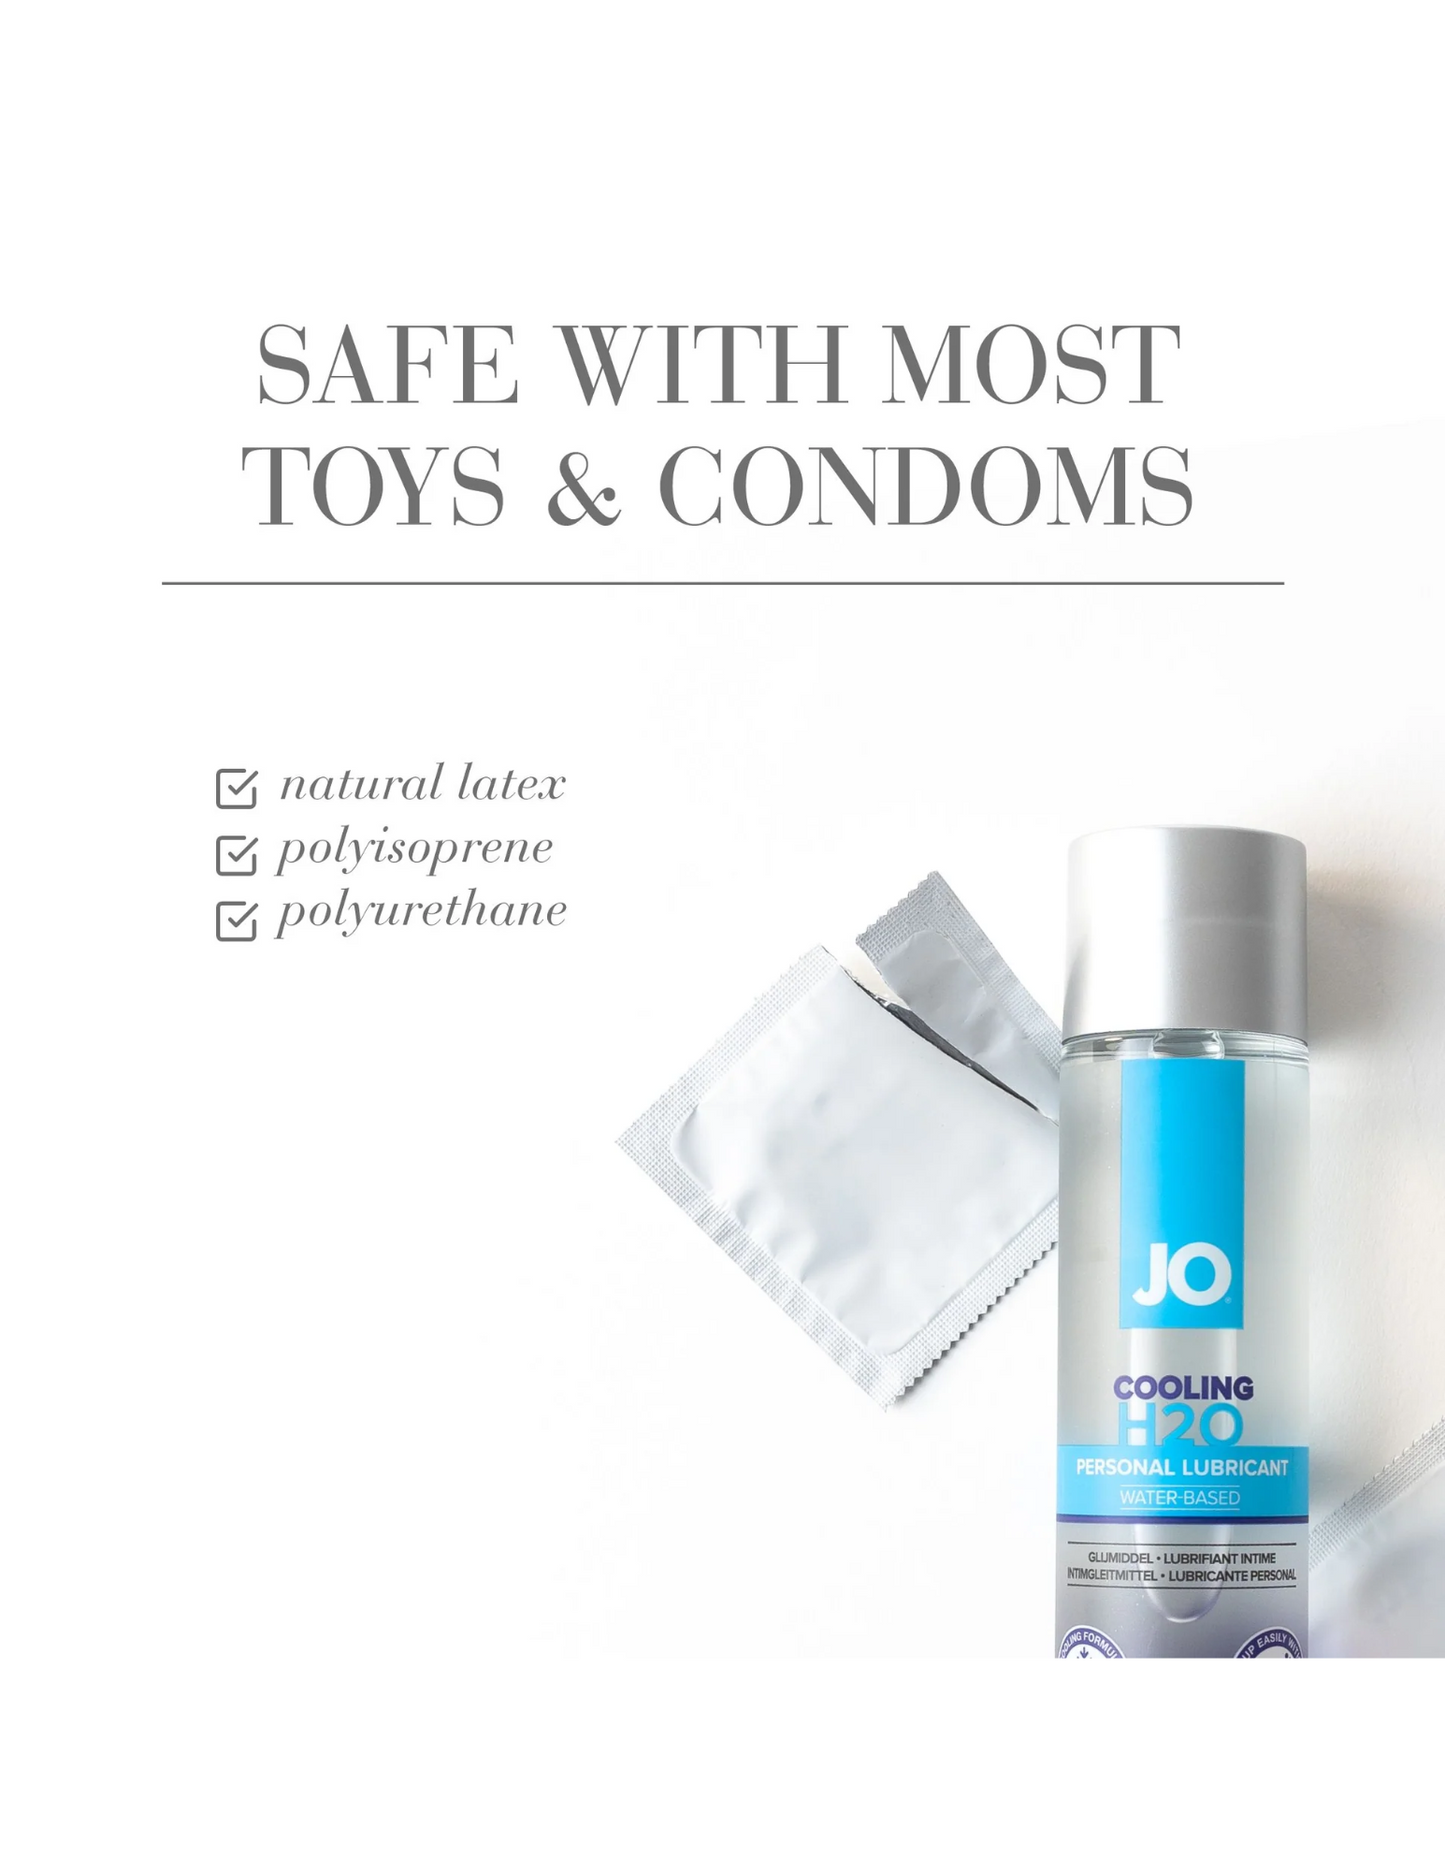 Ad for the System Jo Cooling Water Based Lubricant.